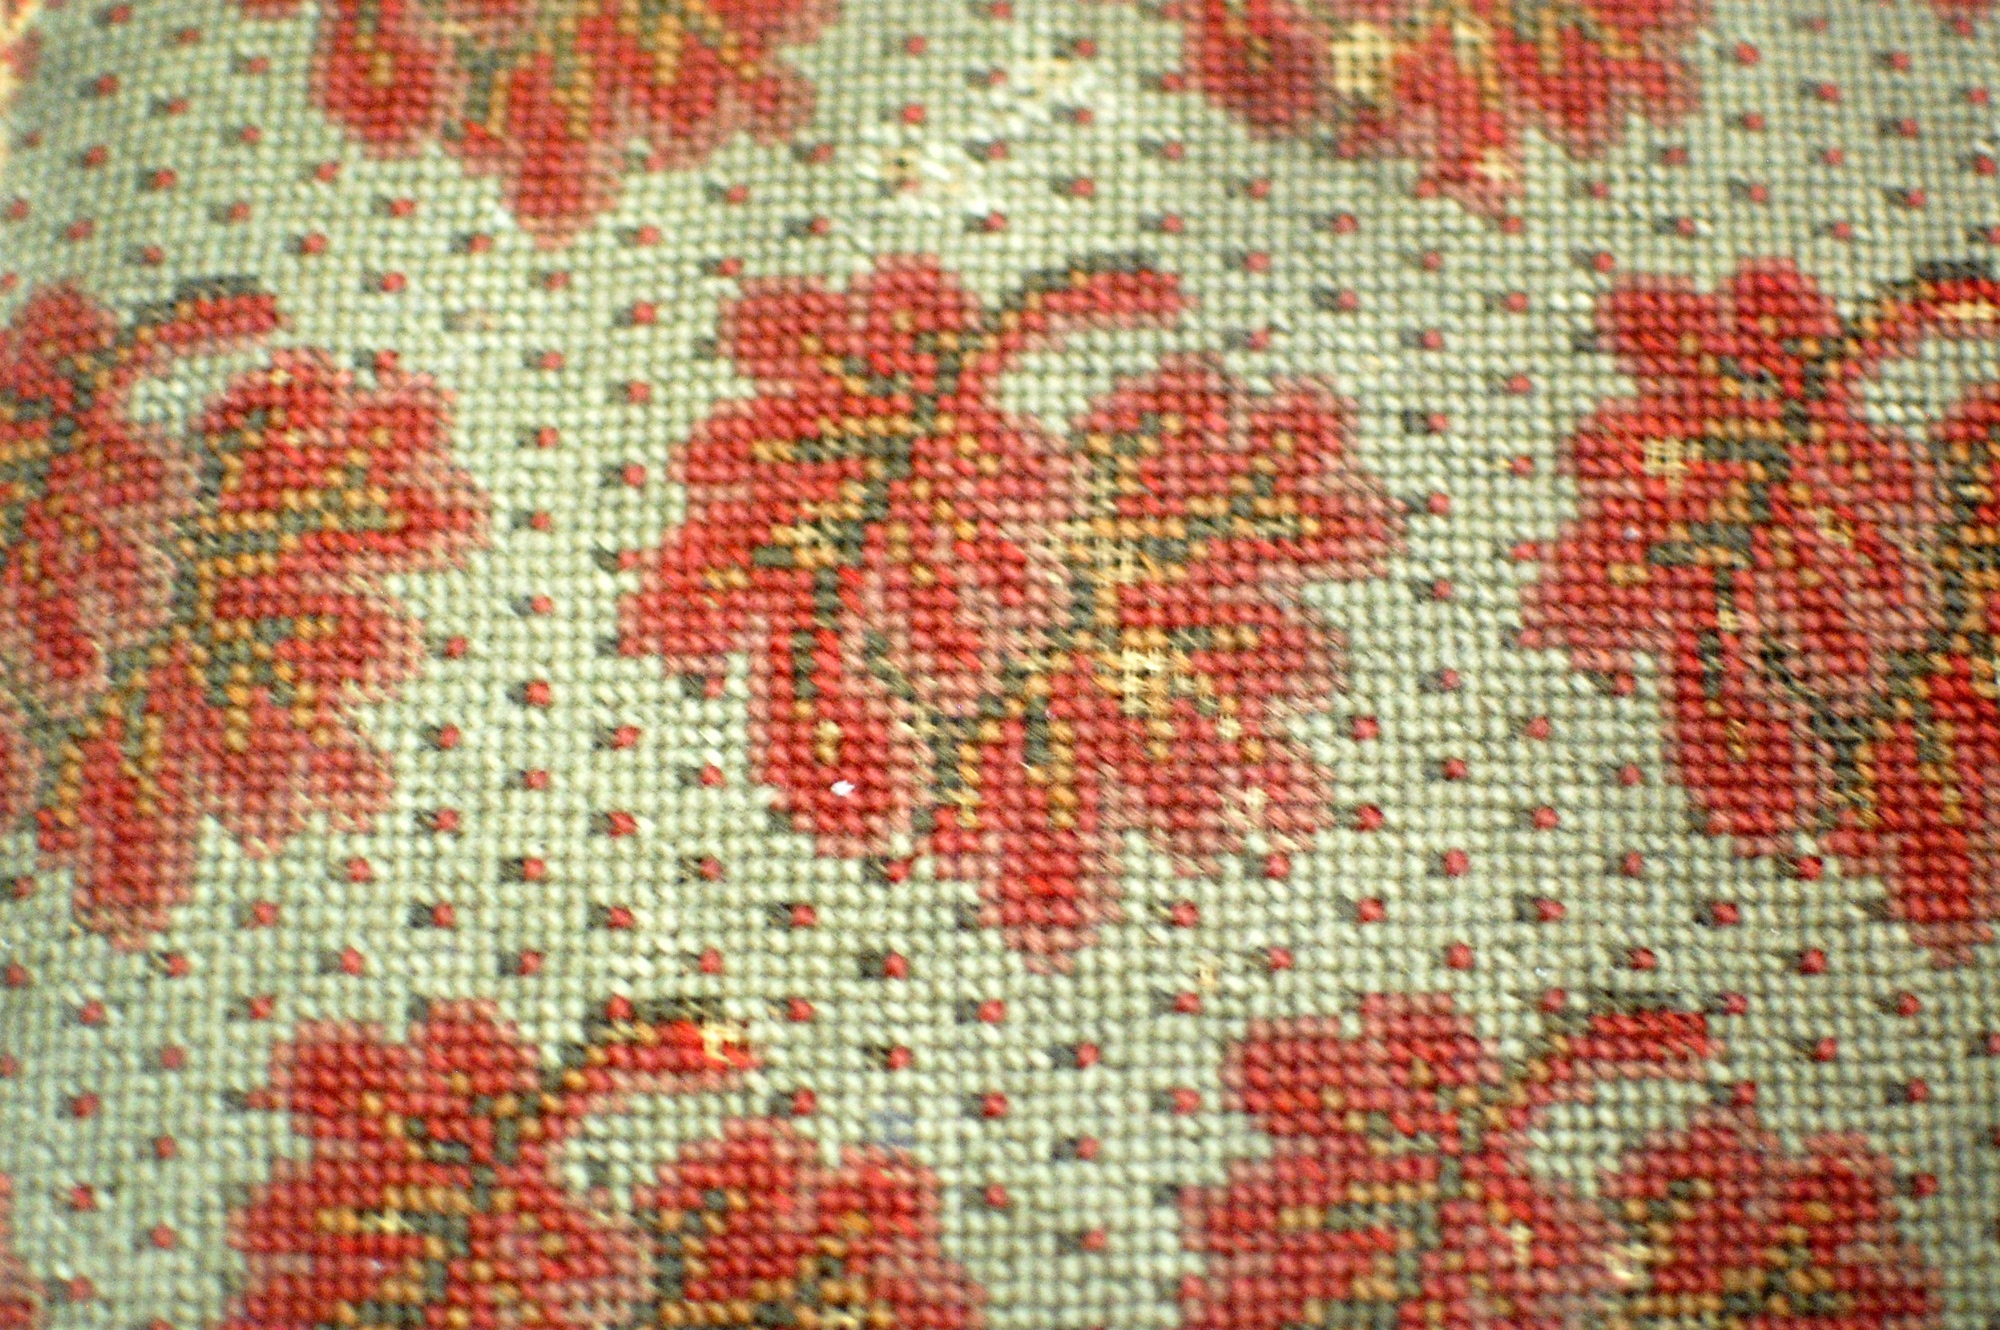 Detail of the top of a footstool. Detail shows embroidered red flower pattern.